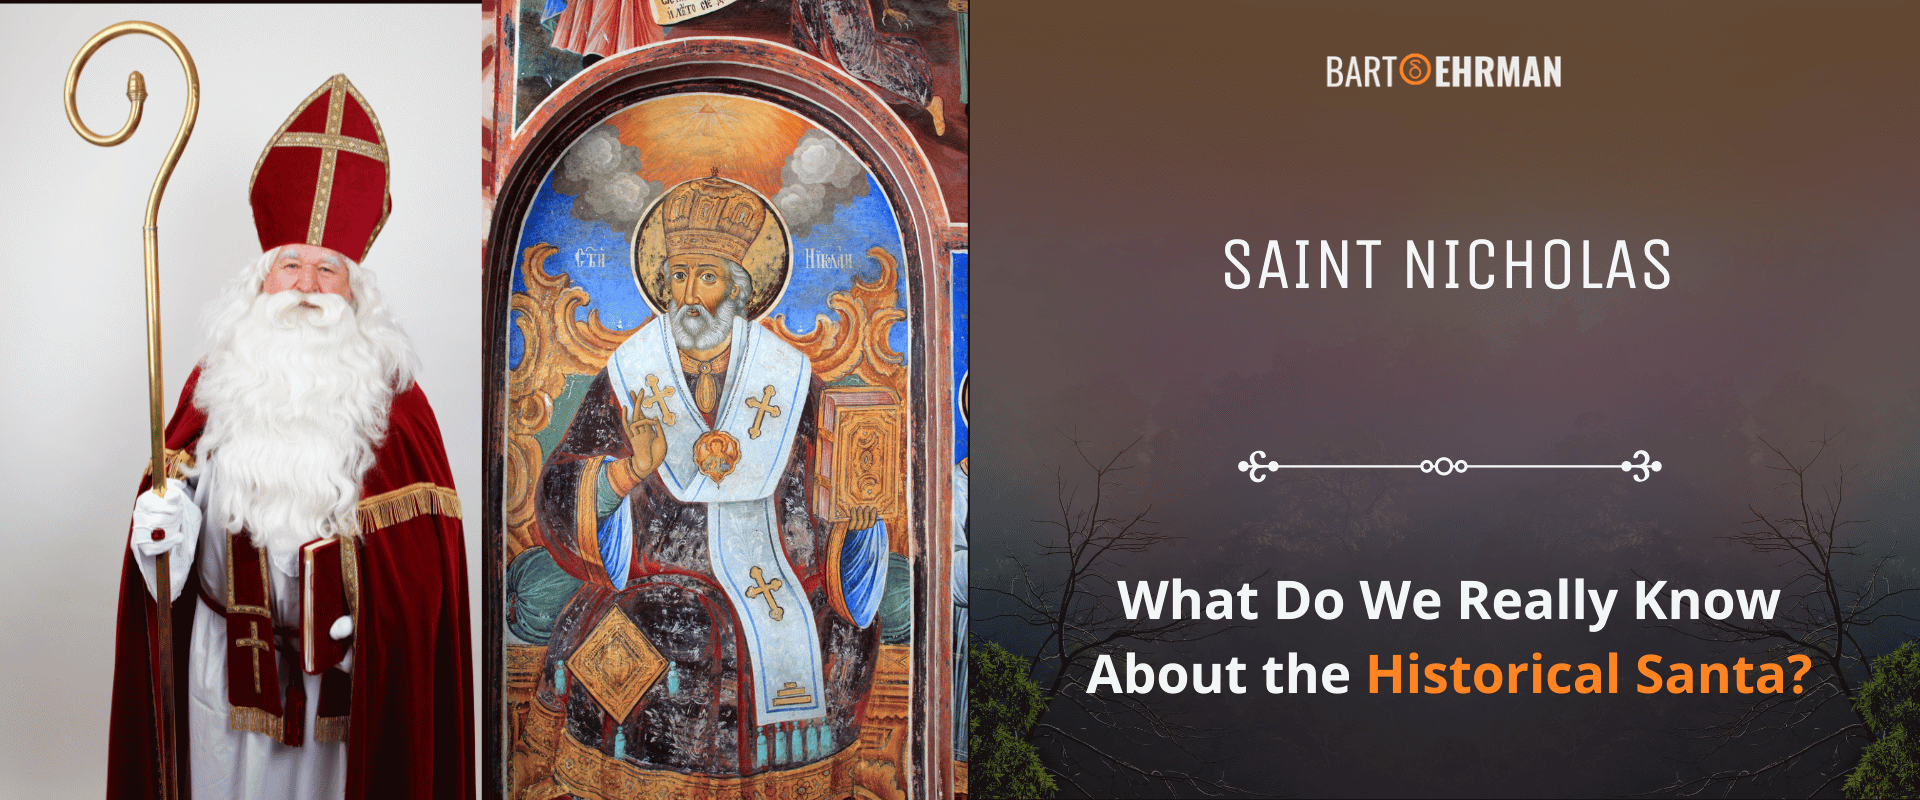 Saint Nicholas - What Do We Really Know About the Historical Santa